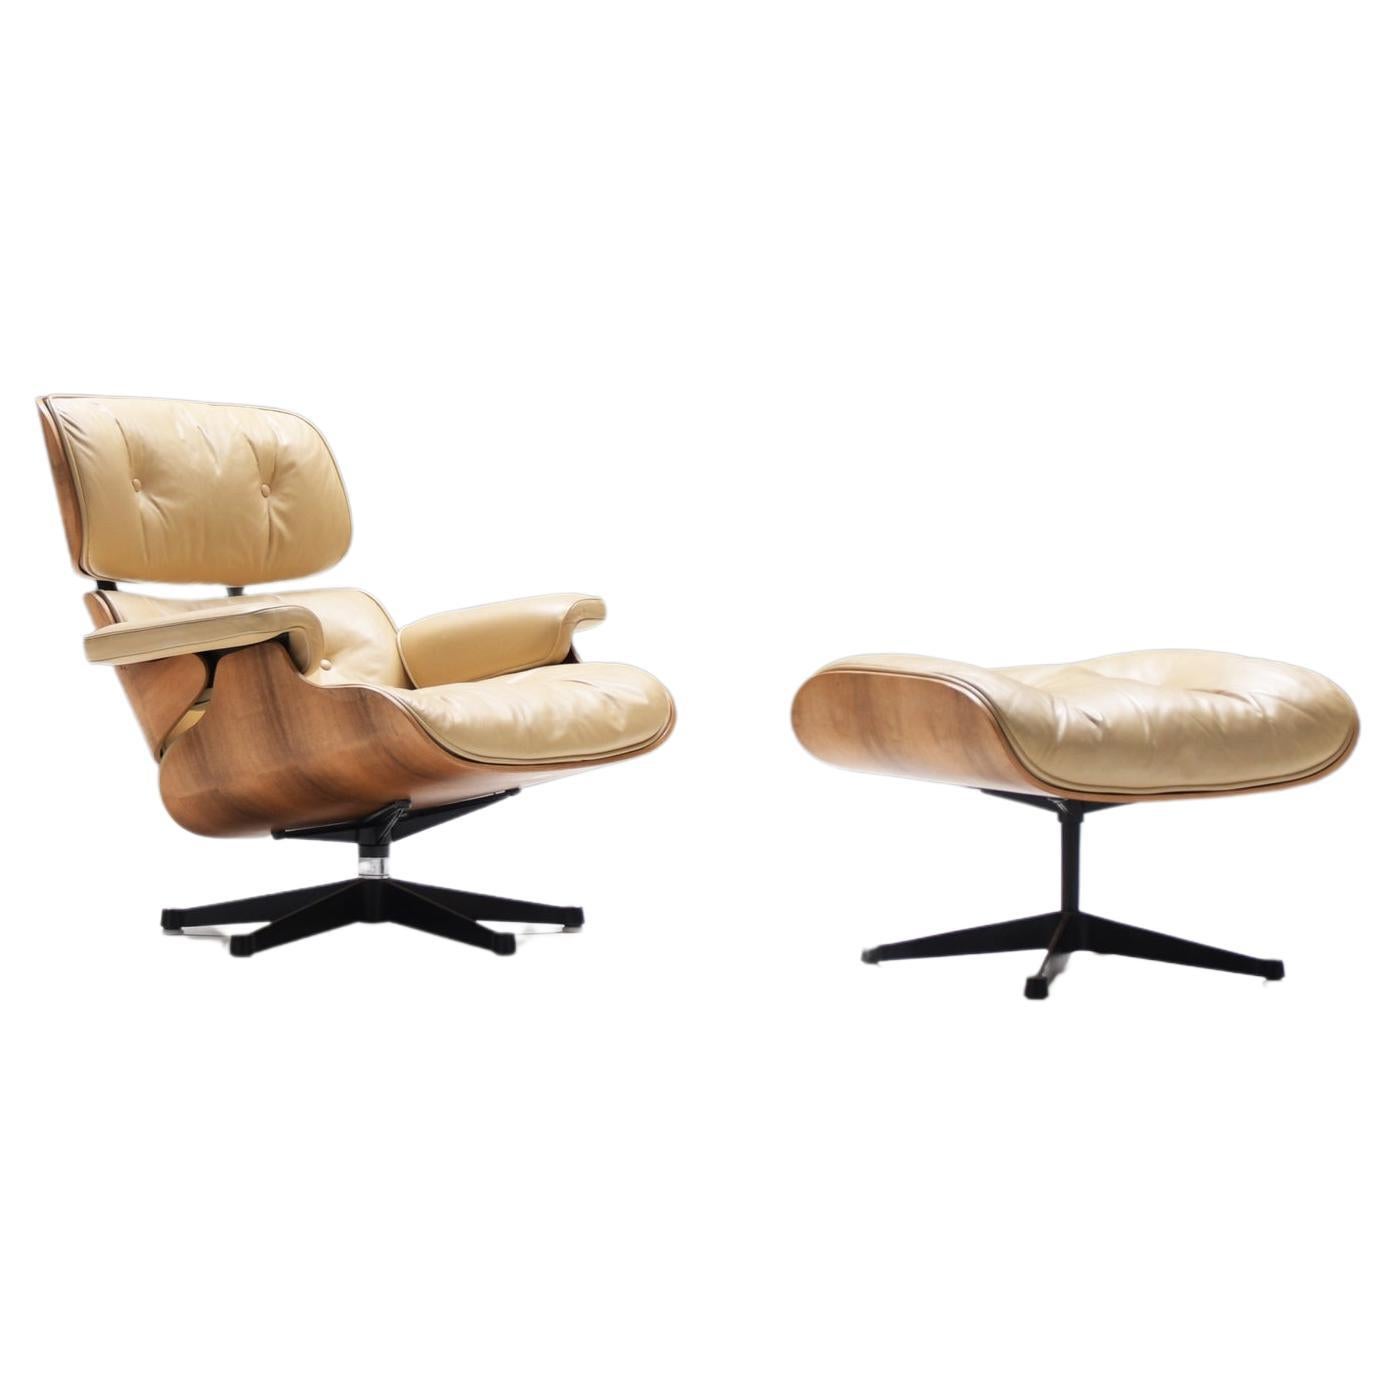  Eames lounge by Ray & Charles Eames by Mobilier International for Herman Miller For Sale